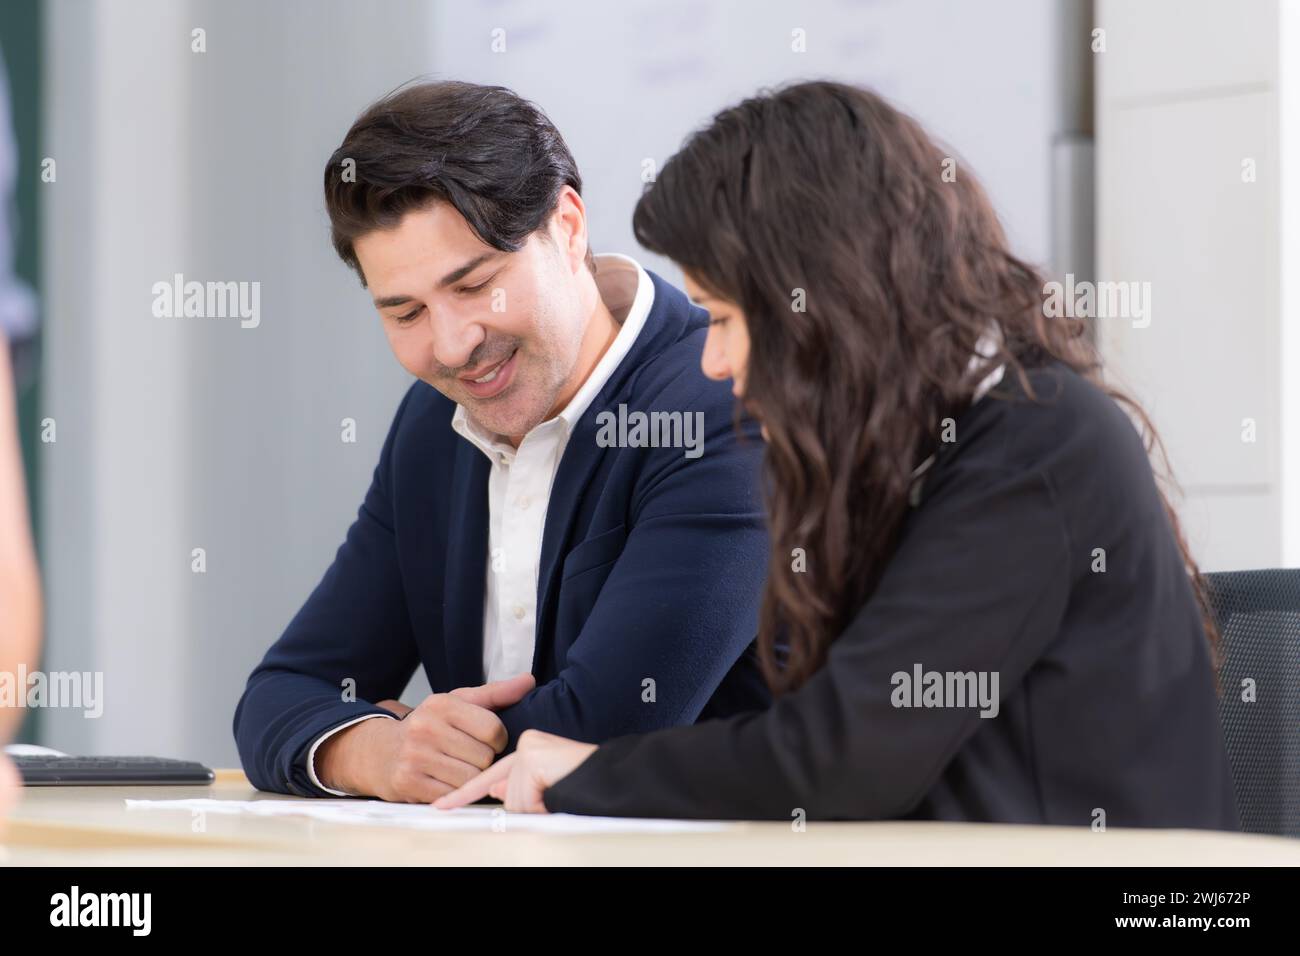 Group of business people working together in a meeting at the office. Stock Photo